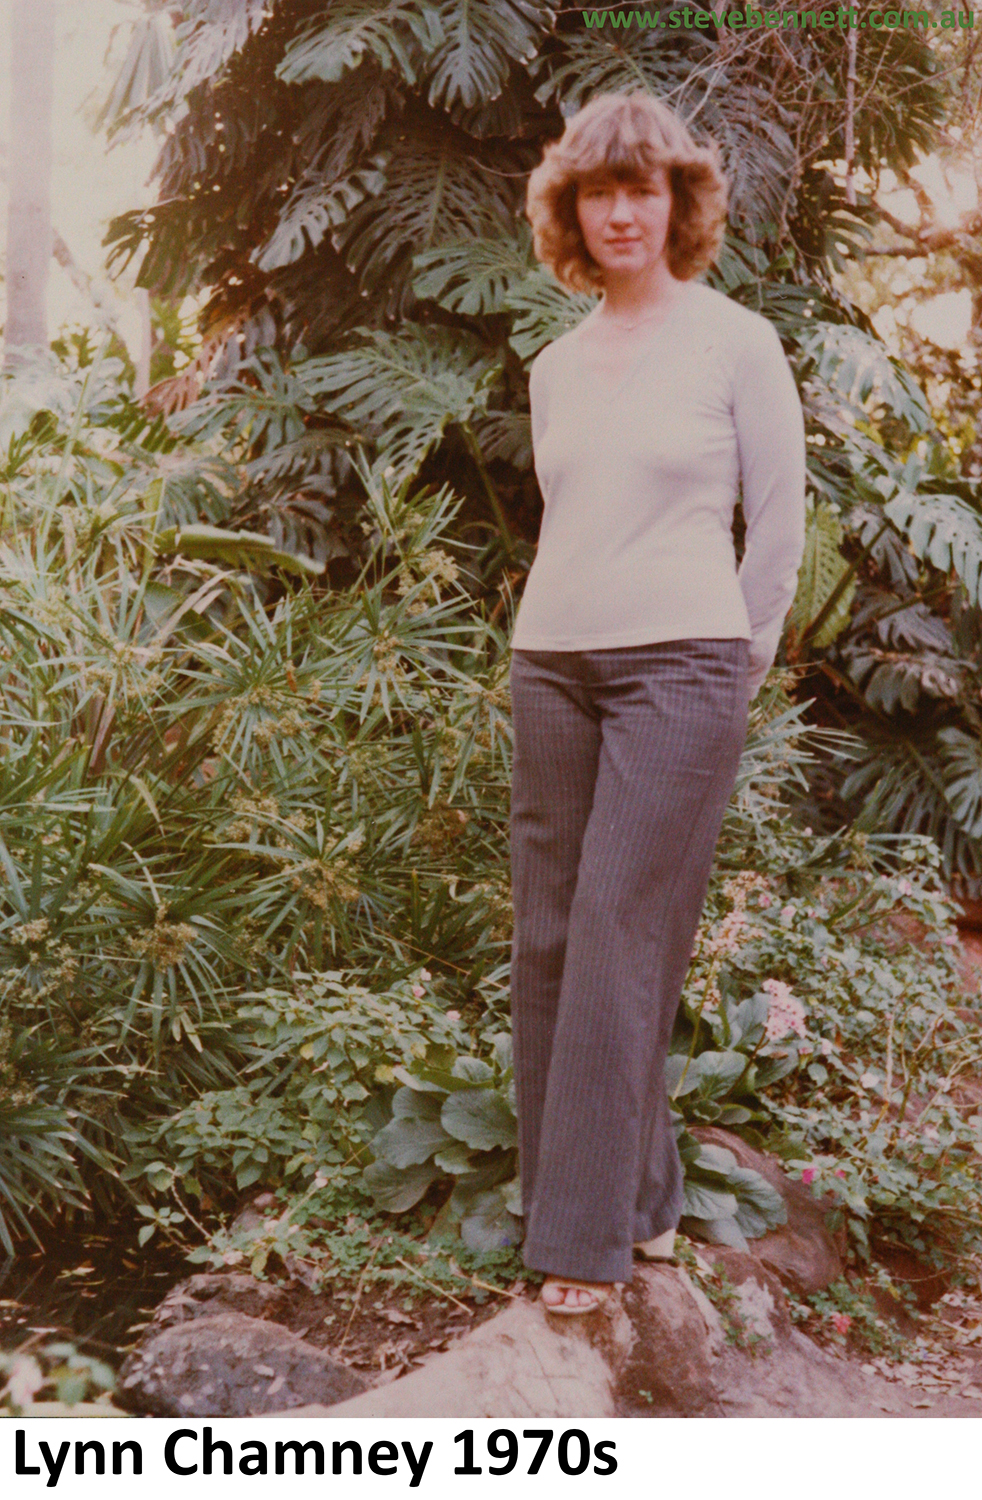 Lynn Chamney at Nyandirwi in early 1970s when at University of Cape Town